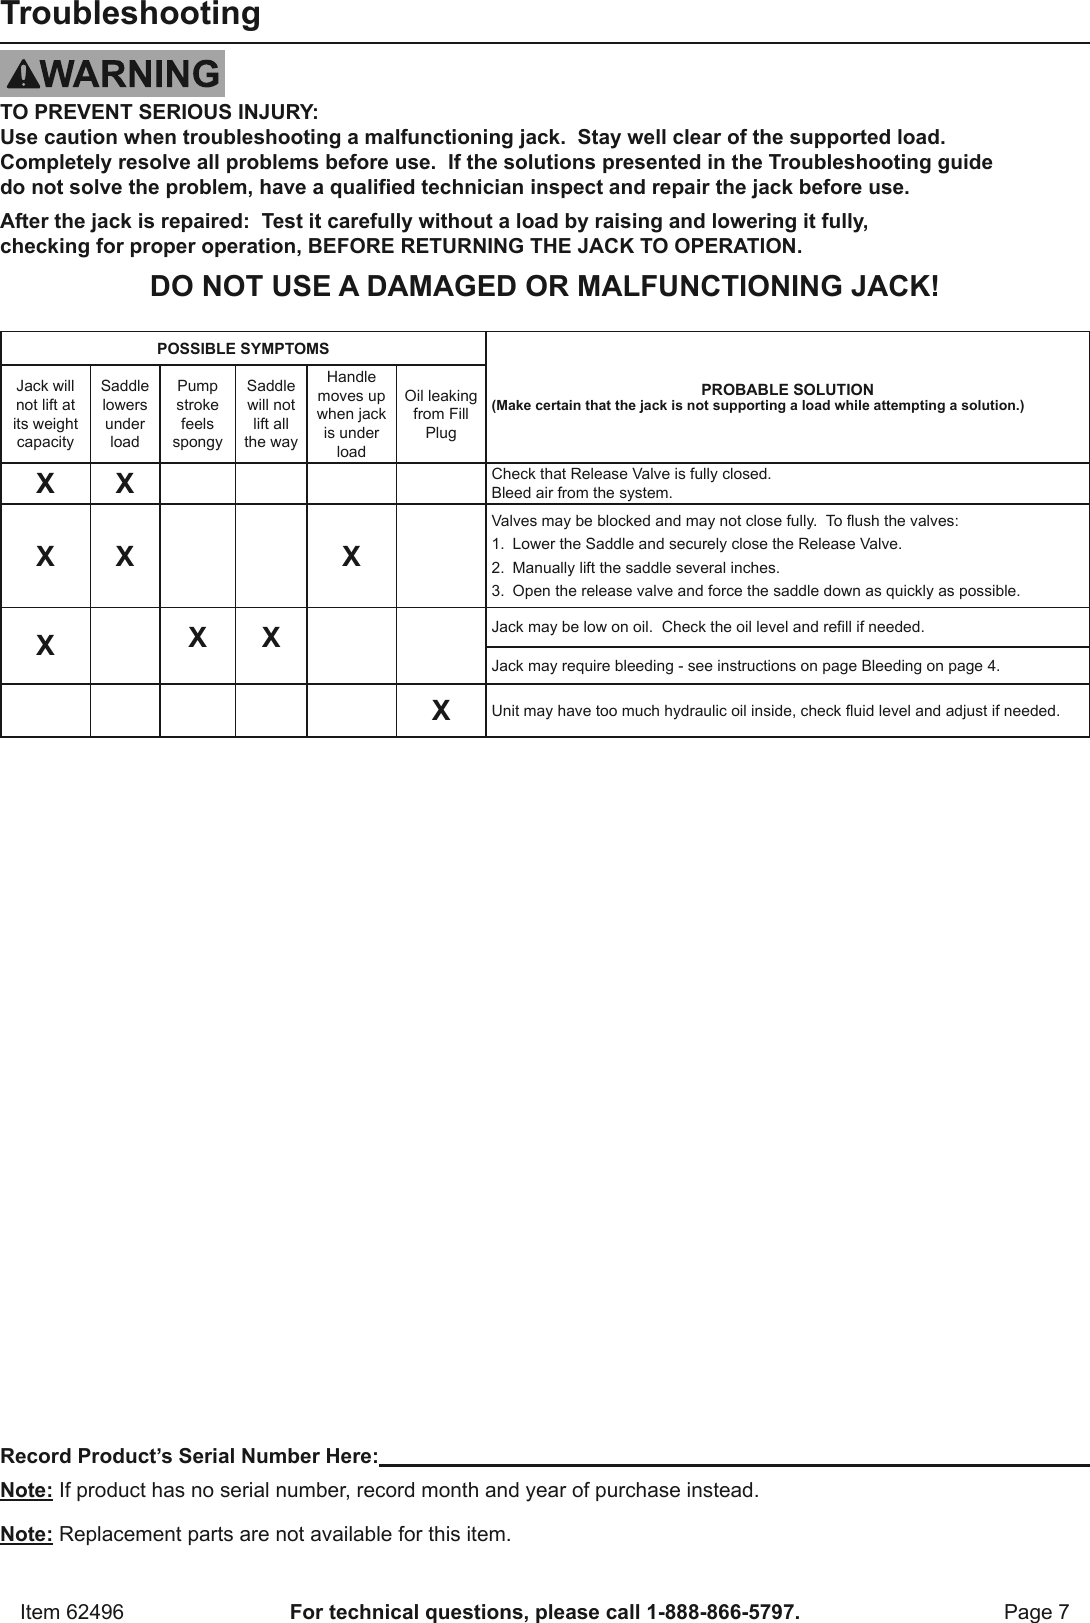 Page 7 of 8 - Manual For The 62496 1.5 Ton Compact Aluminum Racing Floor Jack With Rapid Pump®